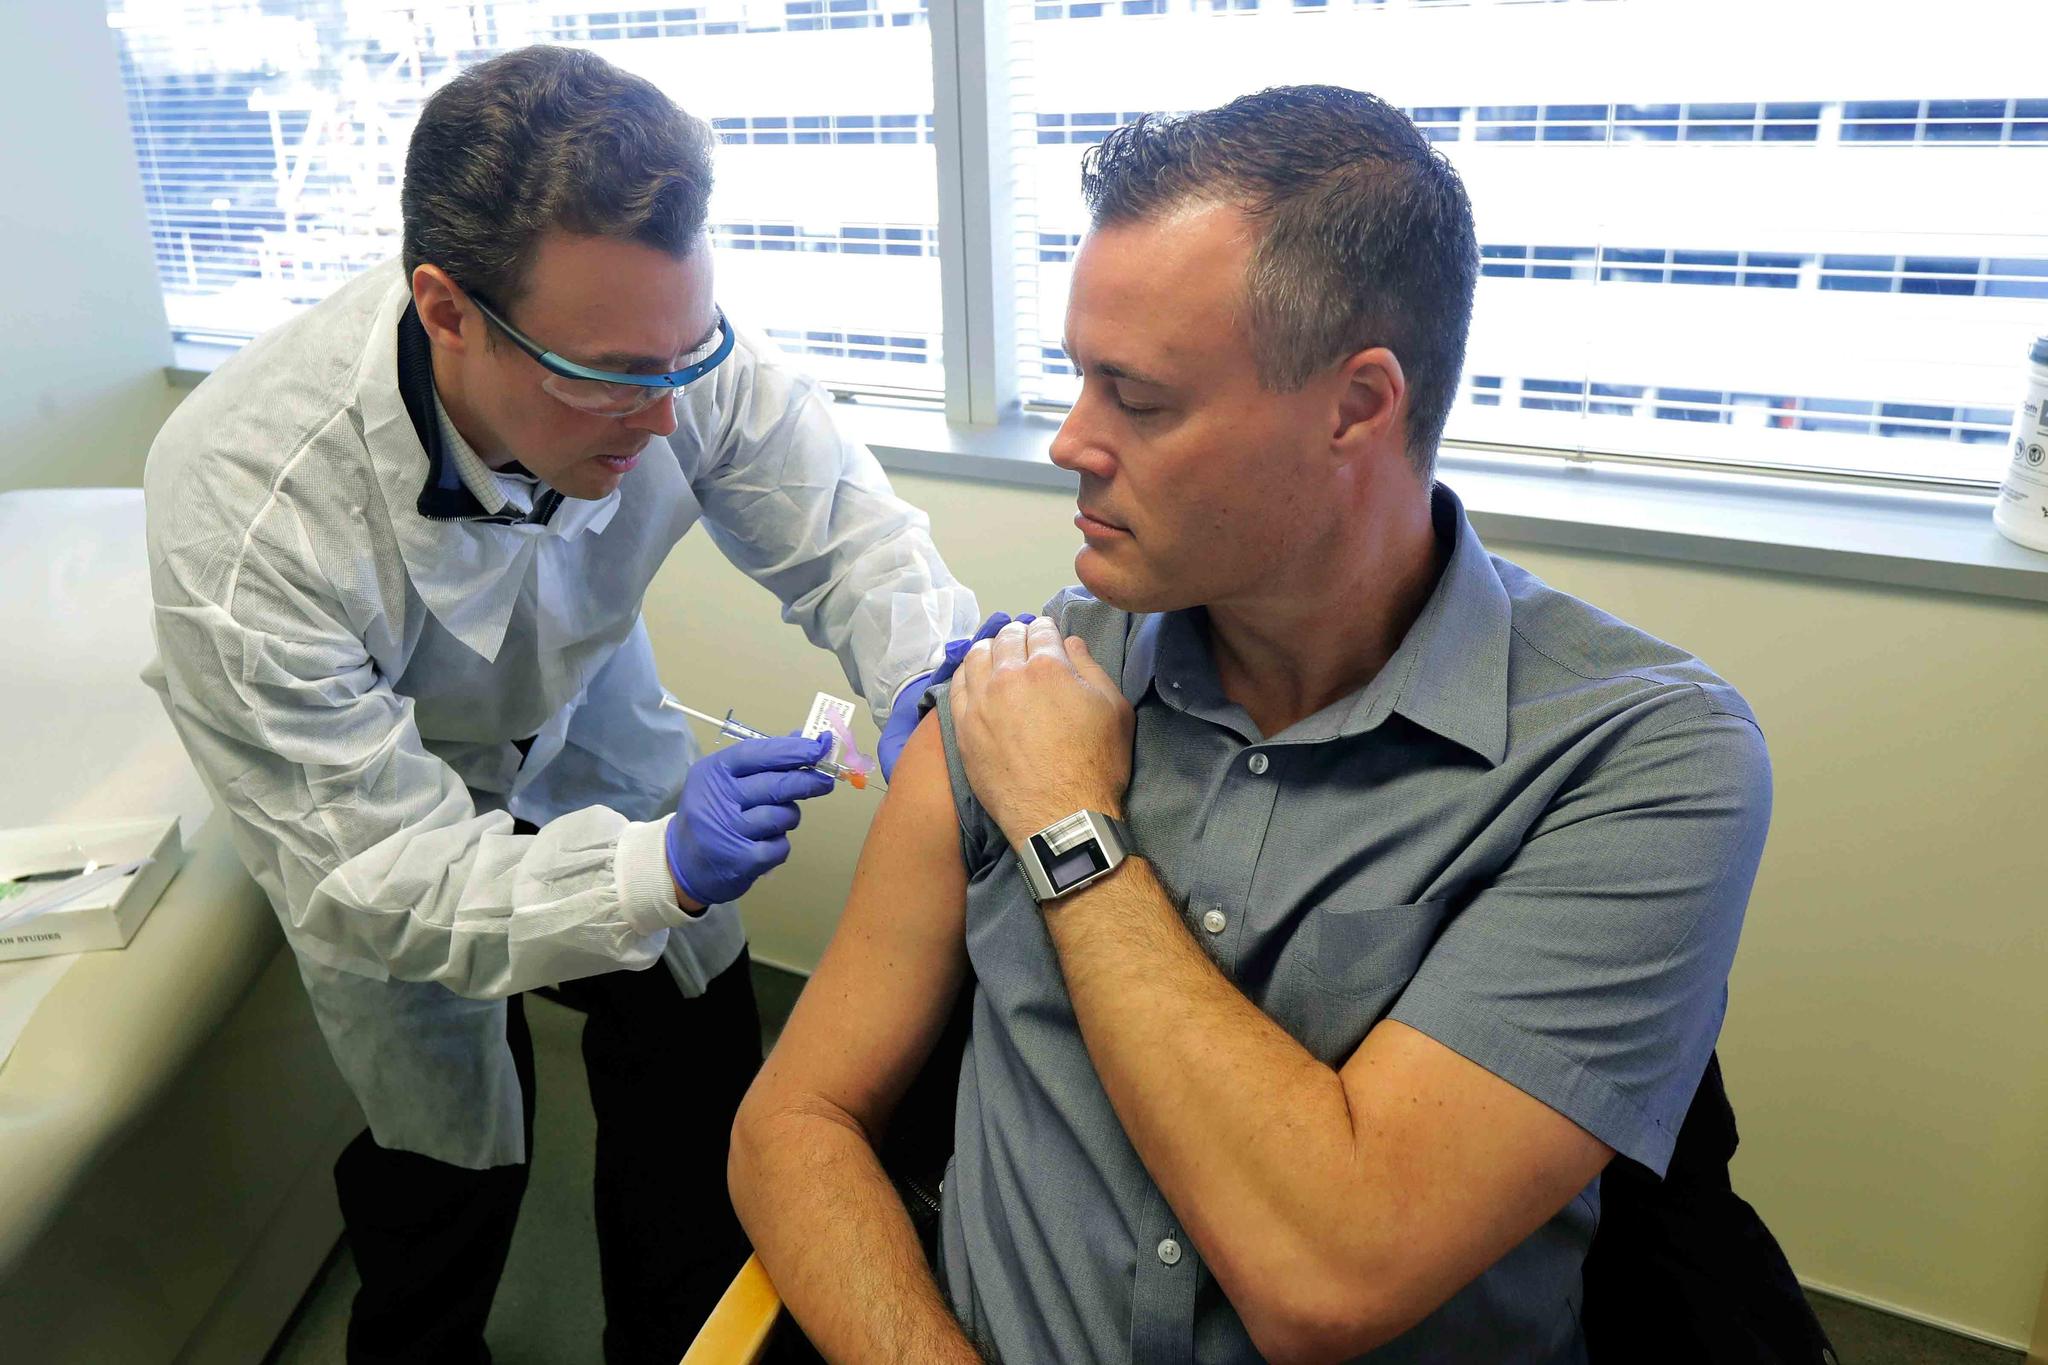 Pharmacist Michael Witte, left, gives Neal Browning, right, a shot in the first-stage safety study clinical trial of a potential vaccine for COVID-19